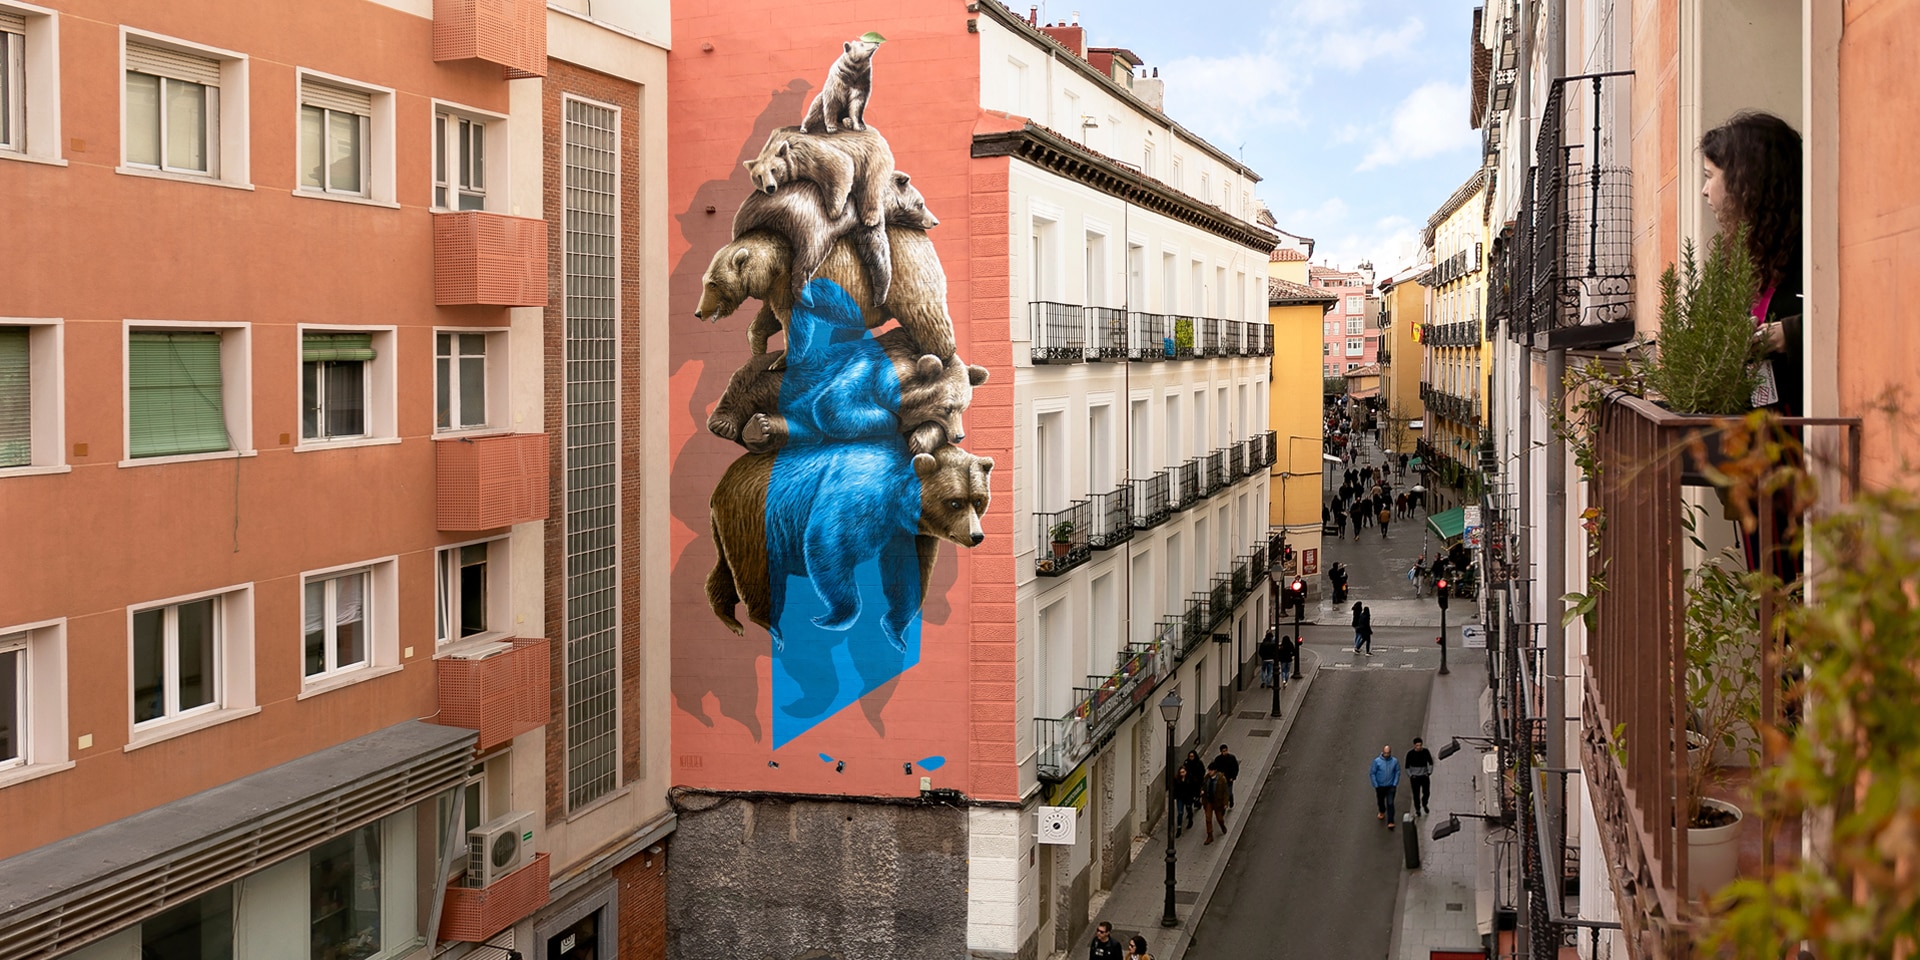 A Nevercrew mural appeared in a street in the centre of Madrid. A woman looks at it from a window